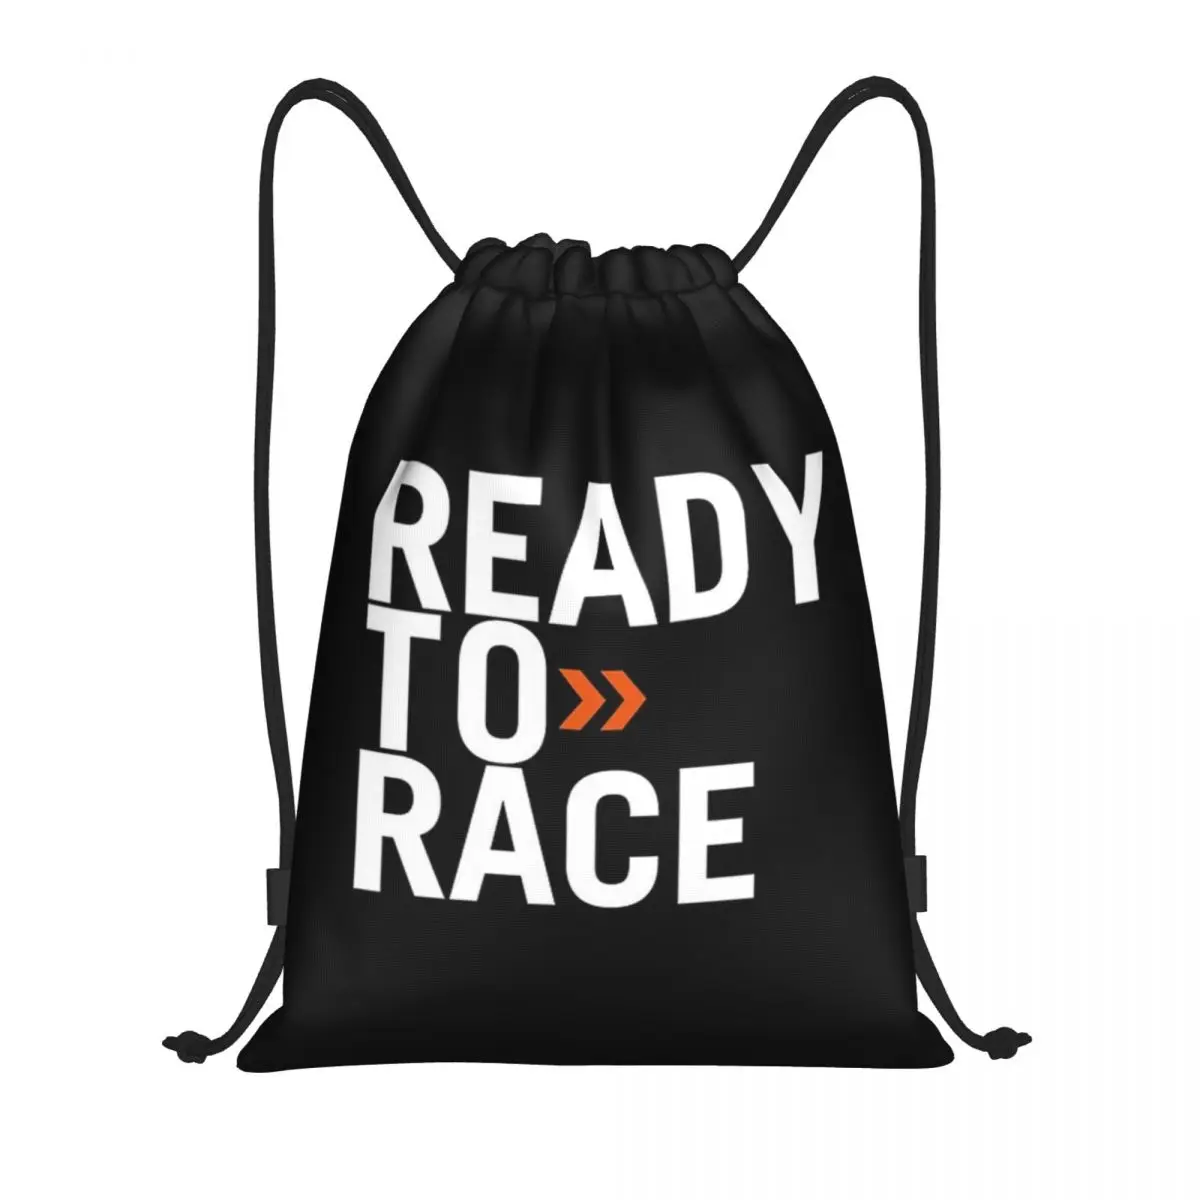 

Ready To Race Drawstring Backpack Sports Gym Bag for Women Men Racing Sport Shopping Sackpack